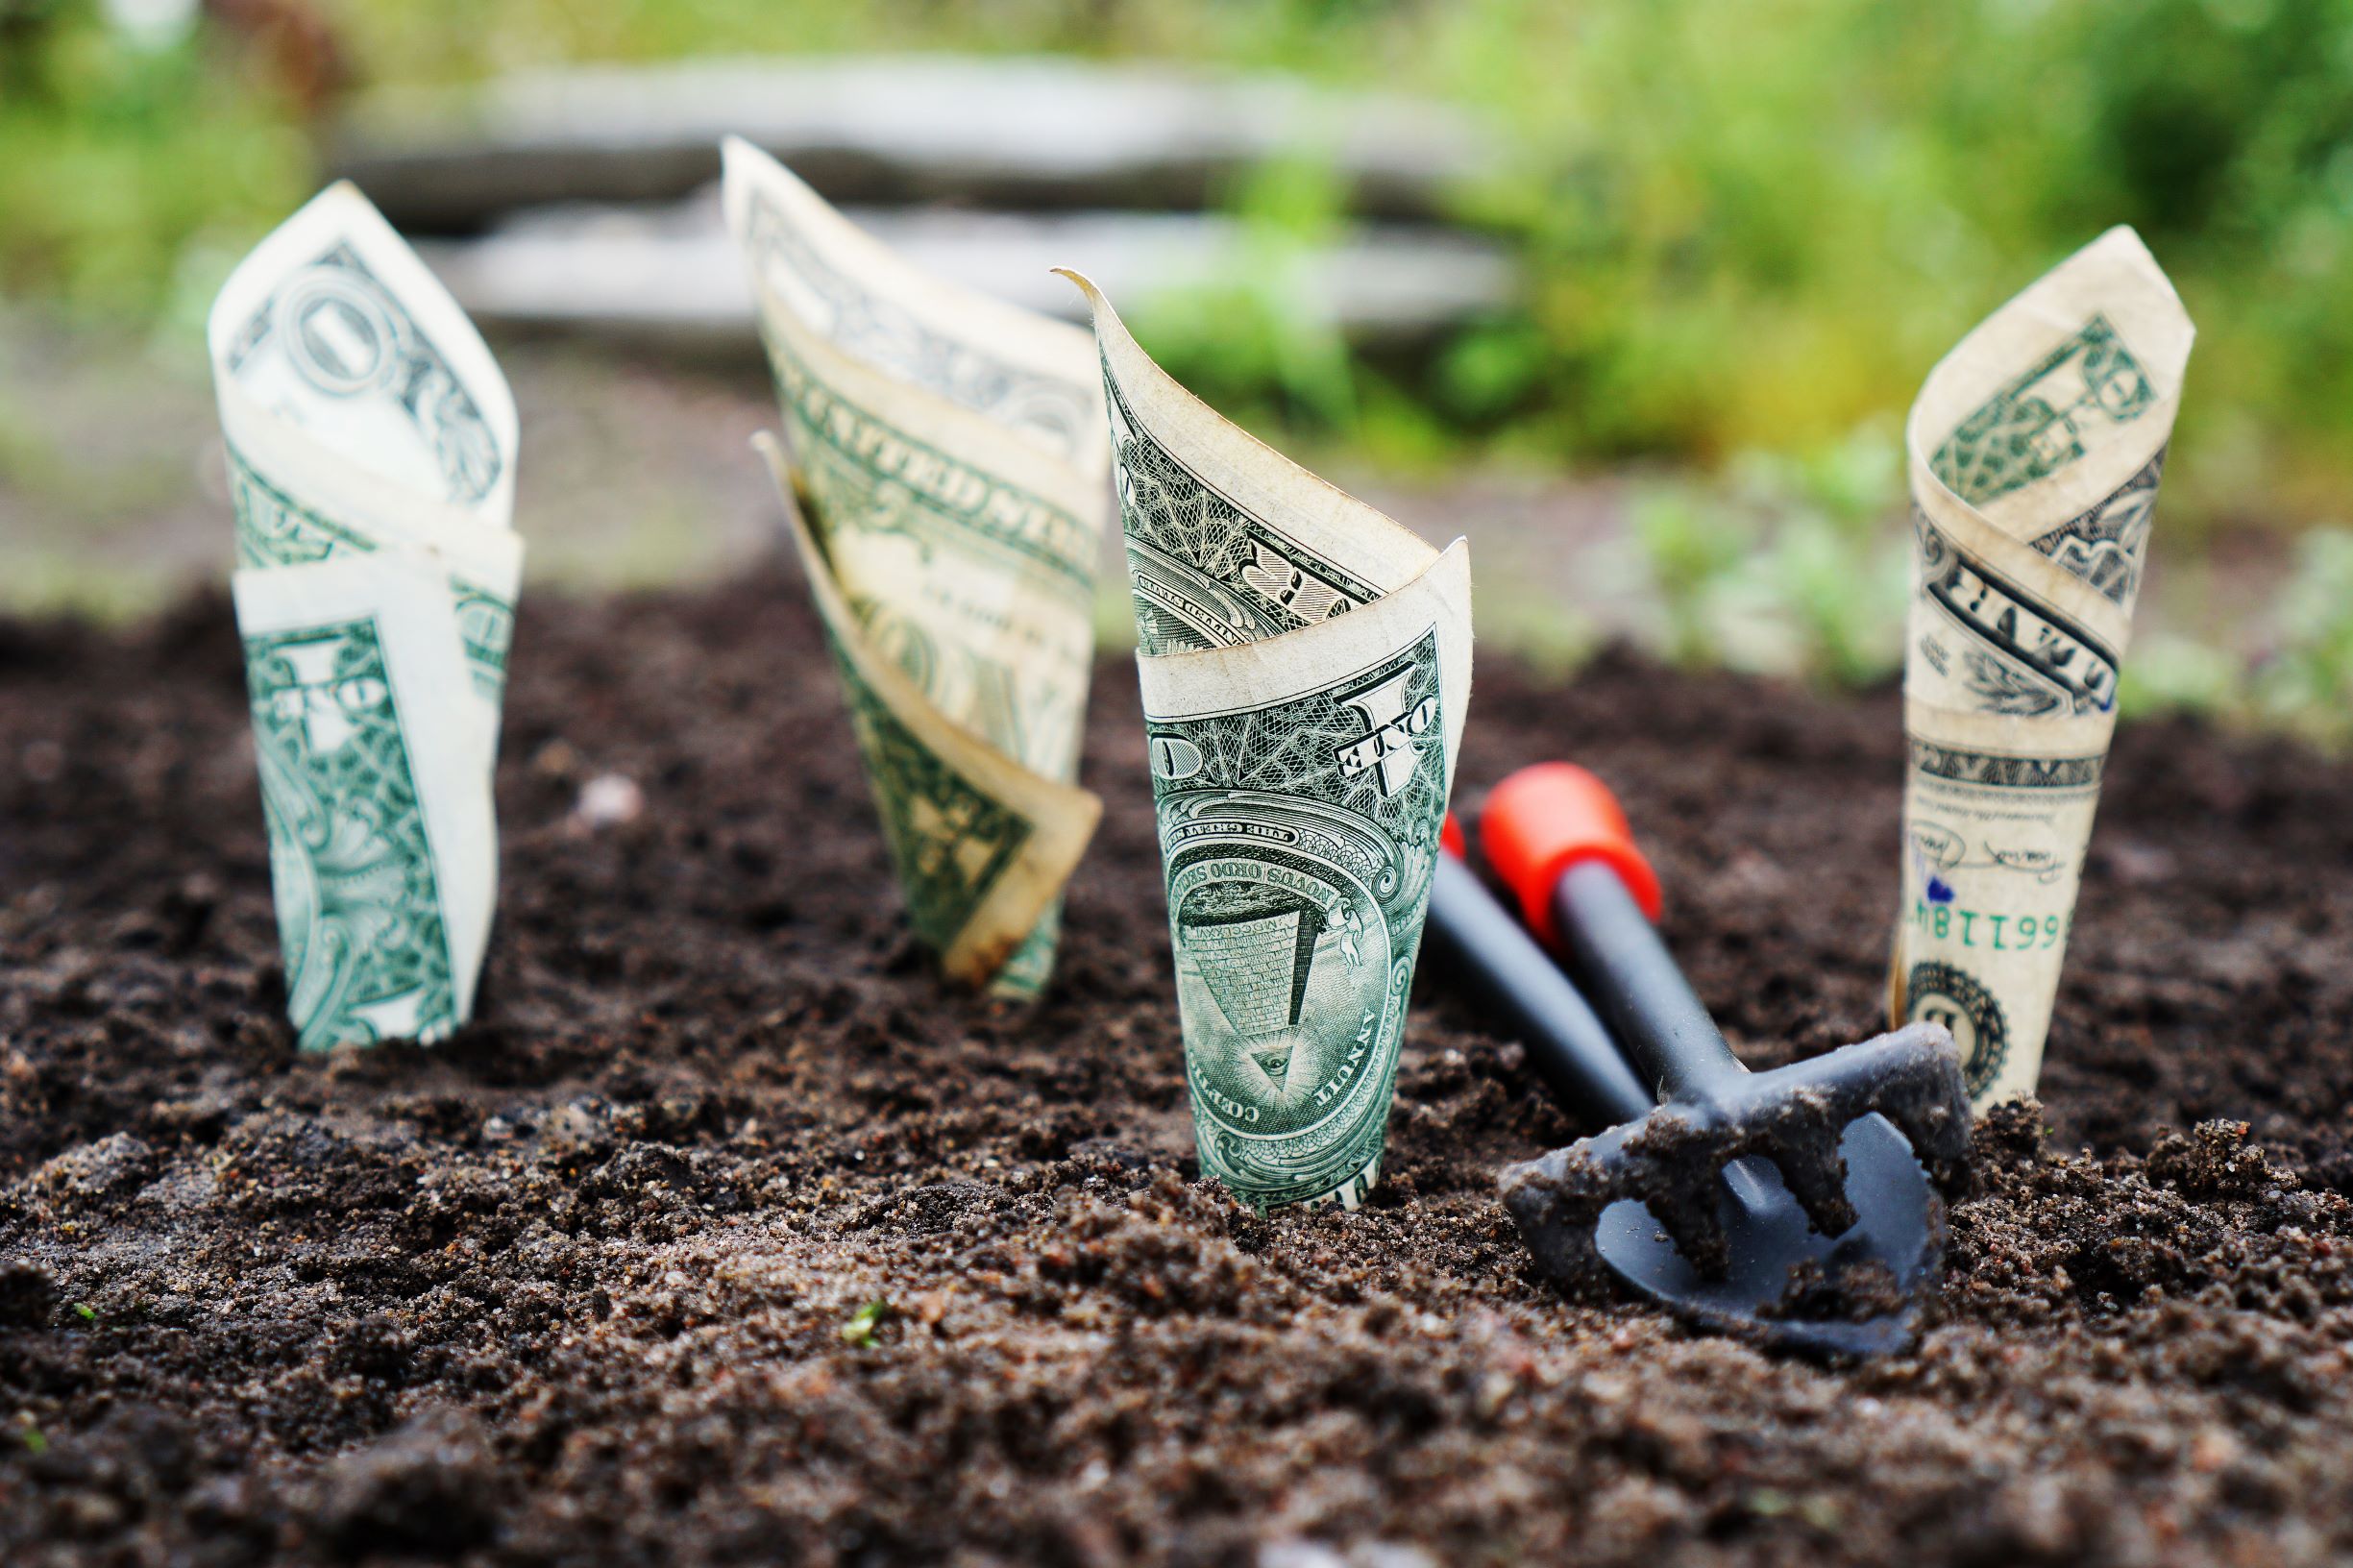 Four dollar bills shaped into cones stuck vertically into a garden bed of dirt next to a trowel and rake.